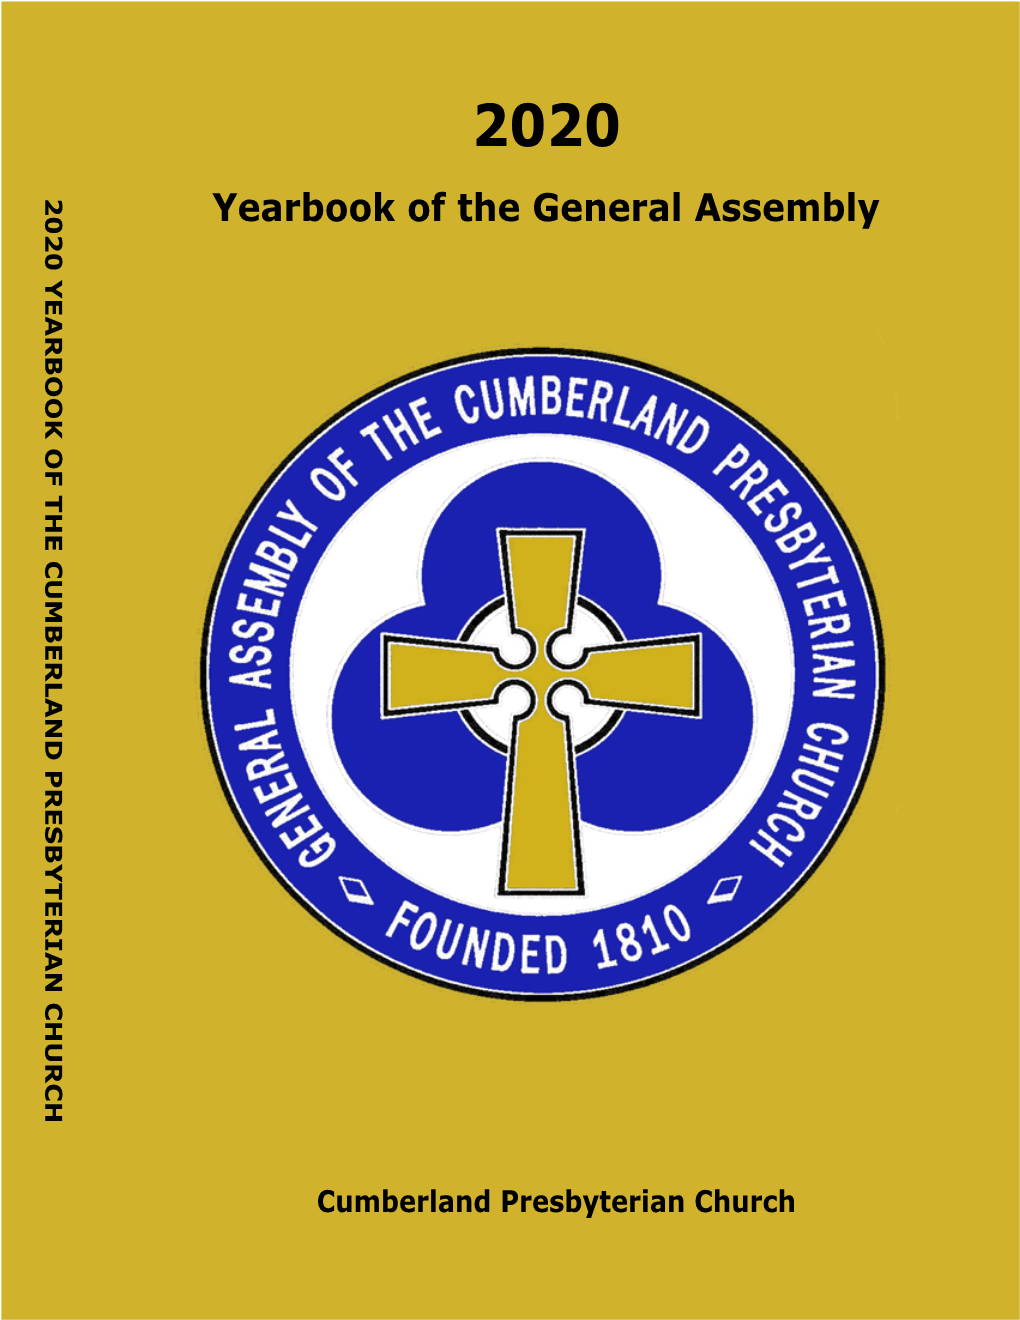 2020 Yearbook of the General Assembly